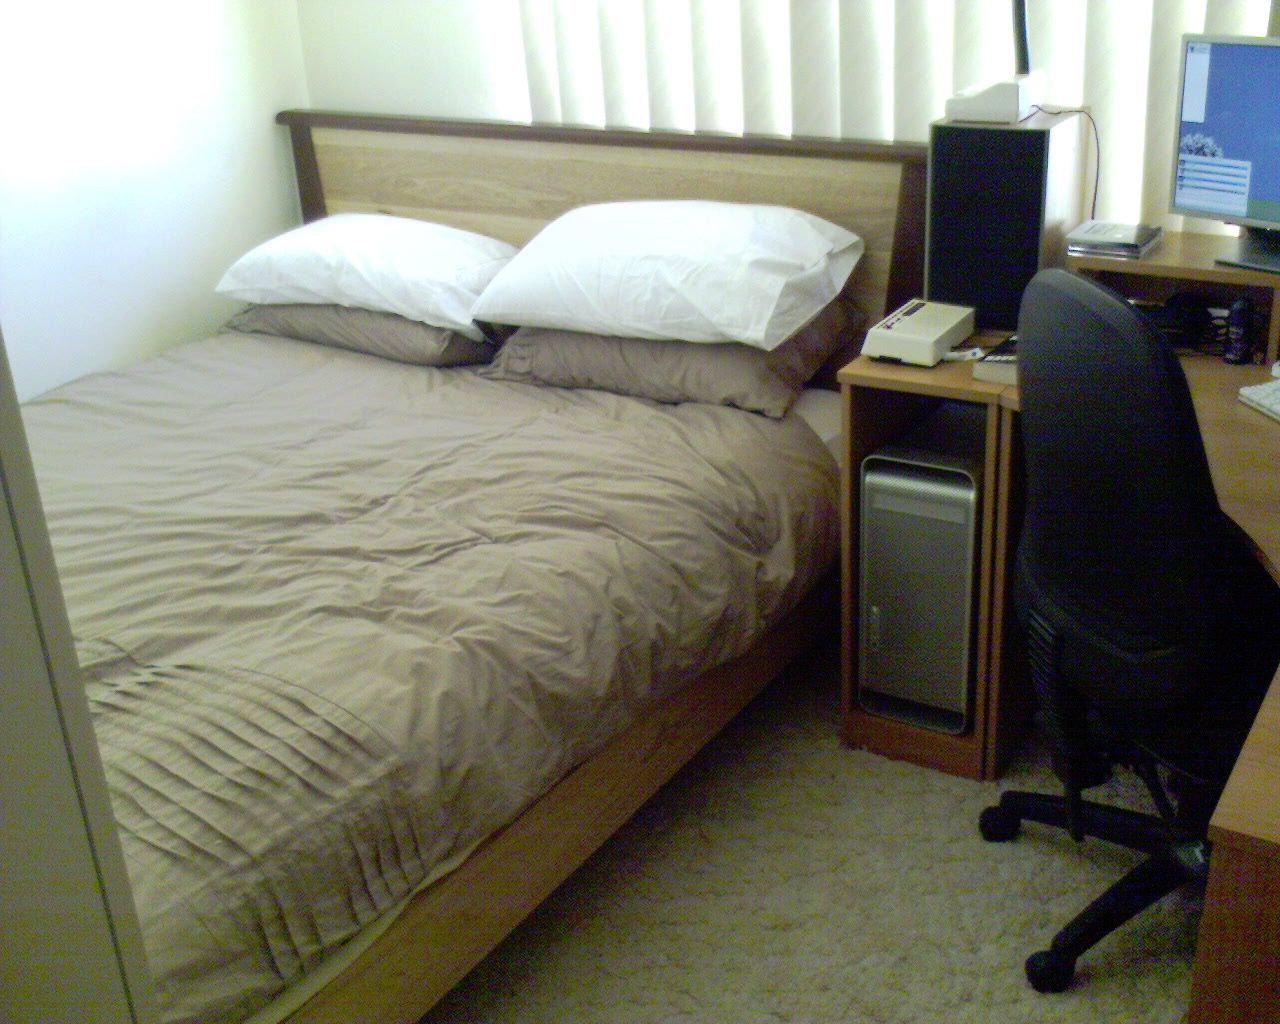 A photo taken from the doorway of a rather small room. There's a queen-size bed sitting on a wooden slatted frame, all neatly made up with pillows and blankets, alongside part of a corner desk with a computer on it.